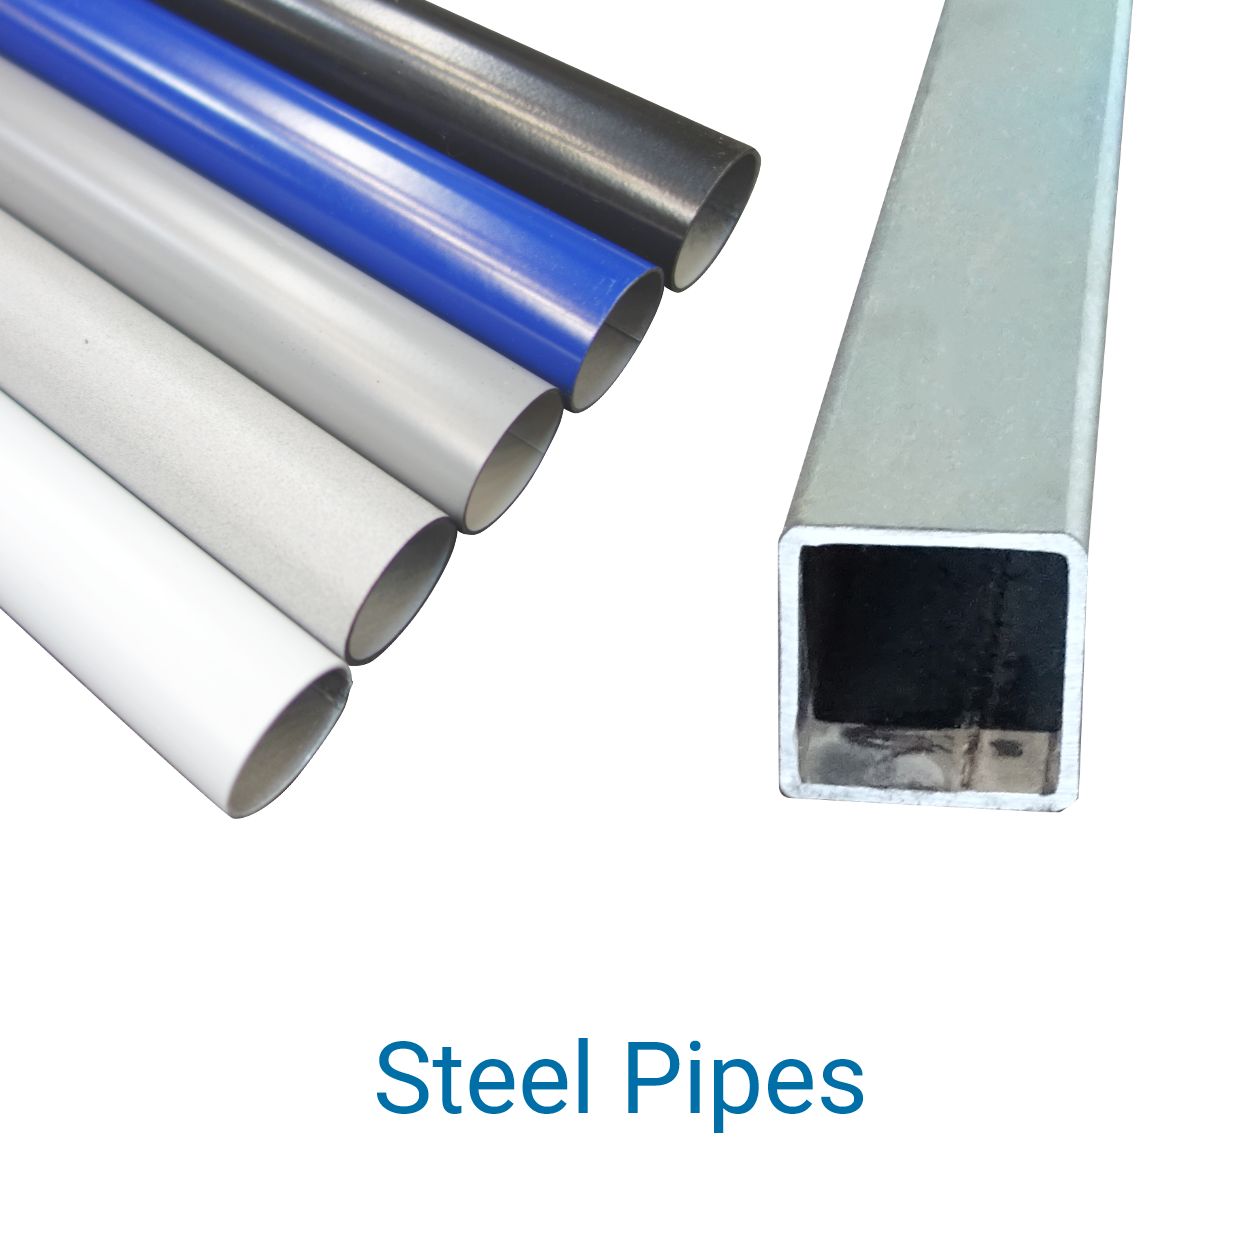 Steel pipes and square steel profiles from G.S. ACE  (BeeWaTec)